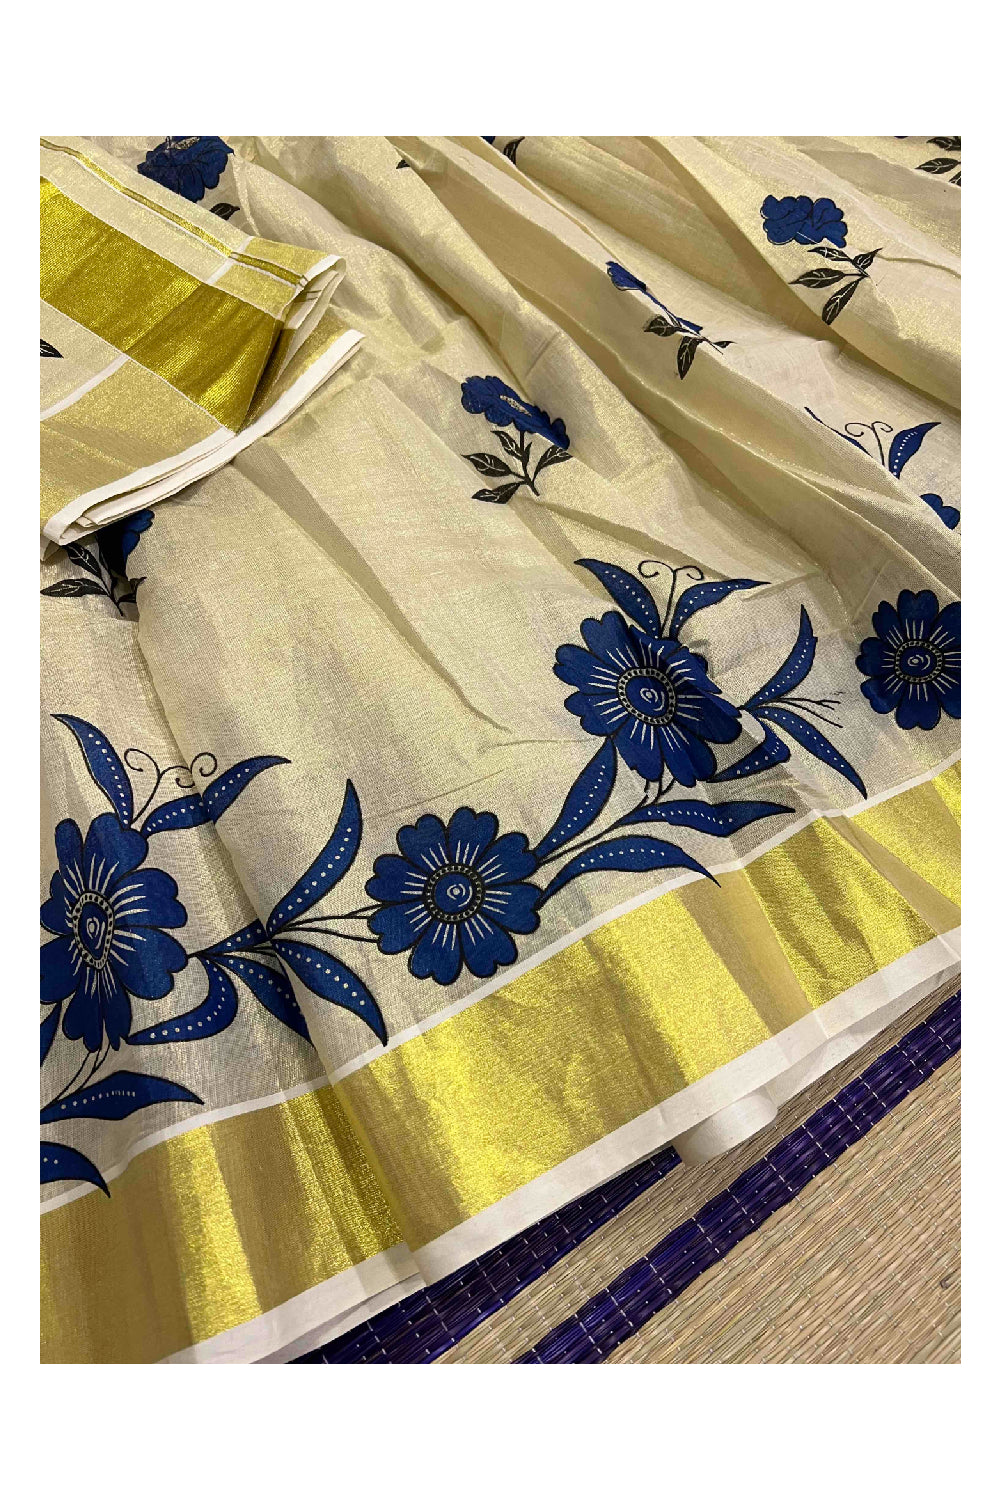 Kerala Tissue Stitched Dhavani Set with Blouse Piece and Neriyathu in with Blue Accents and Mural Designs